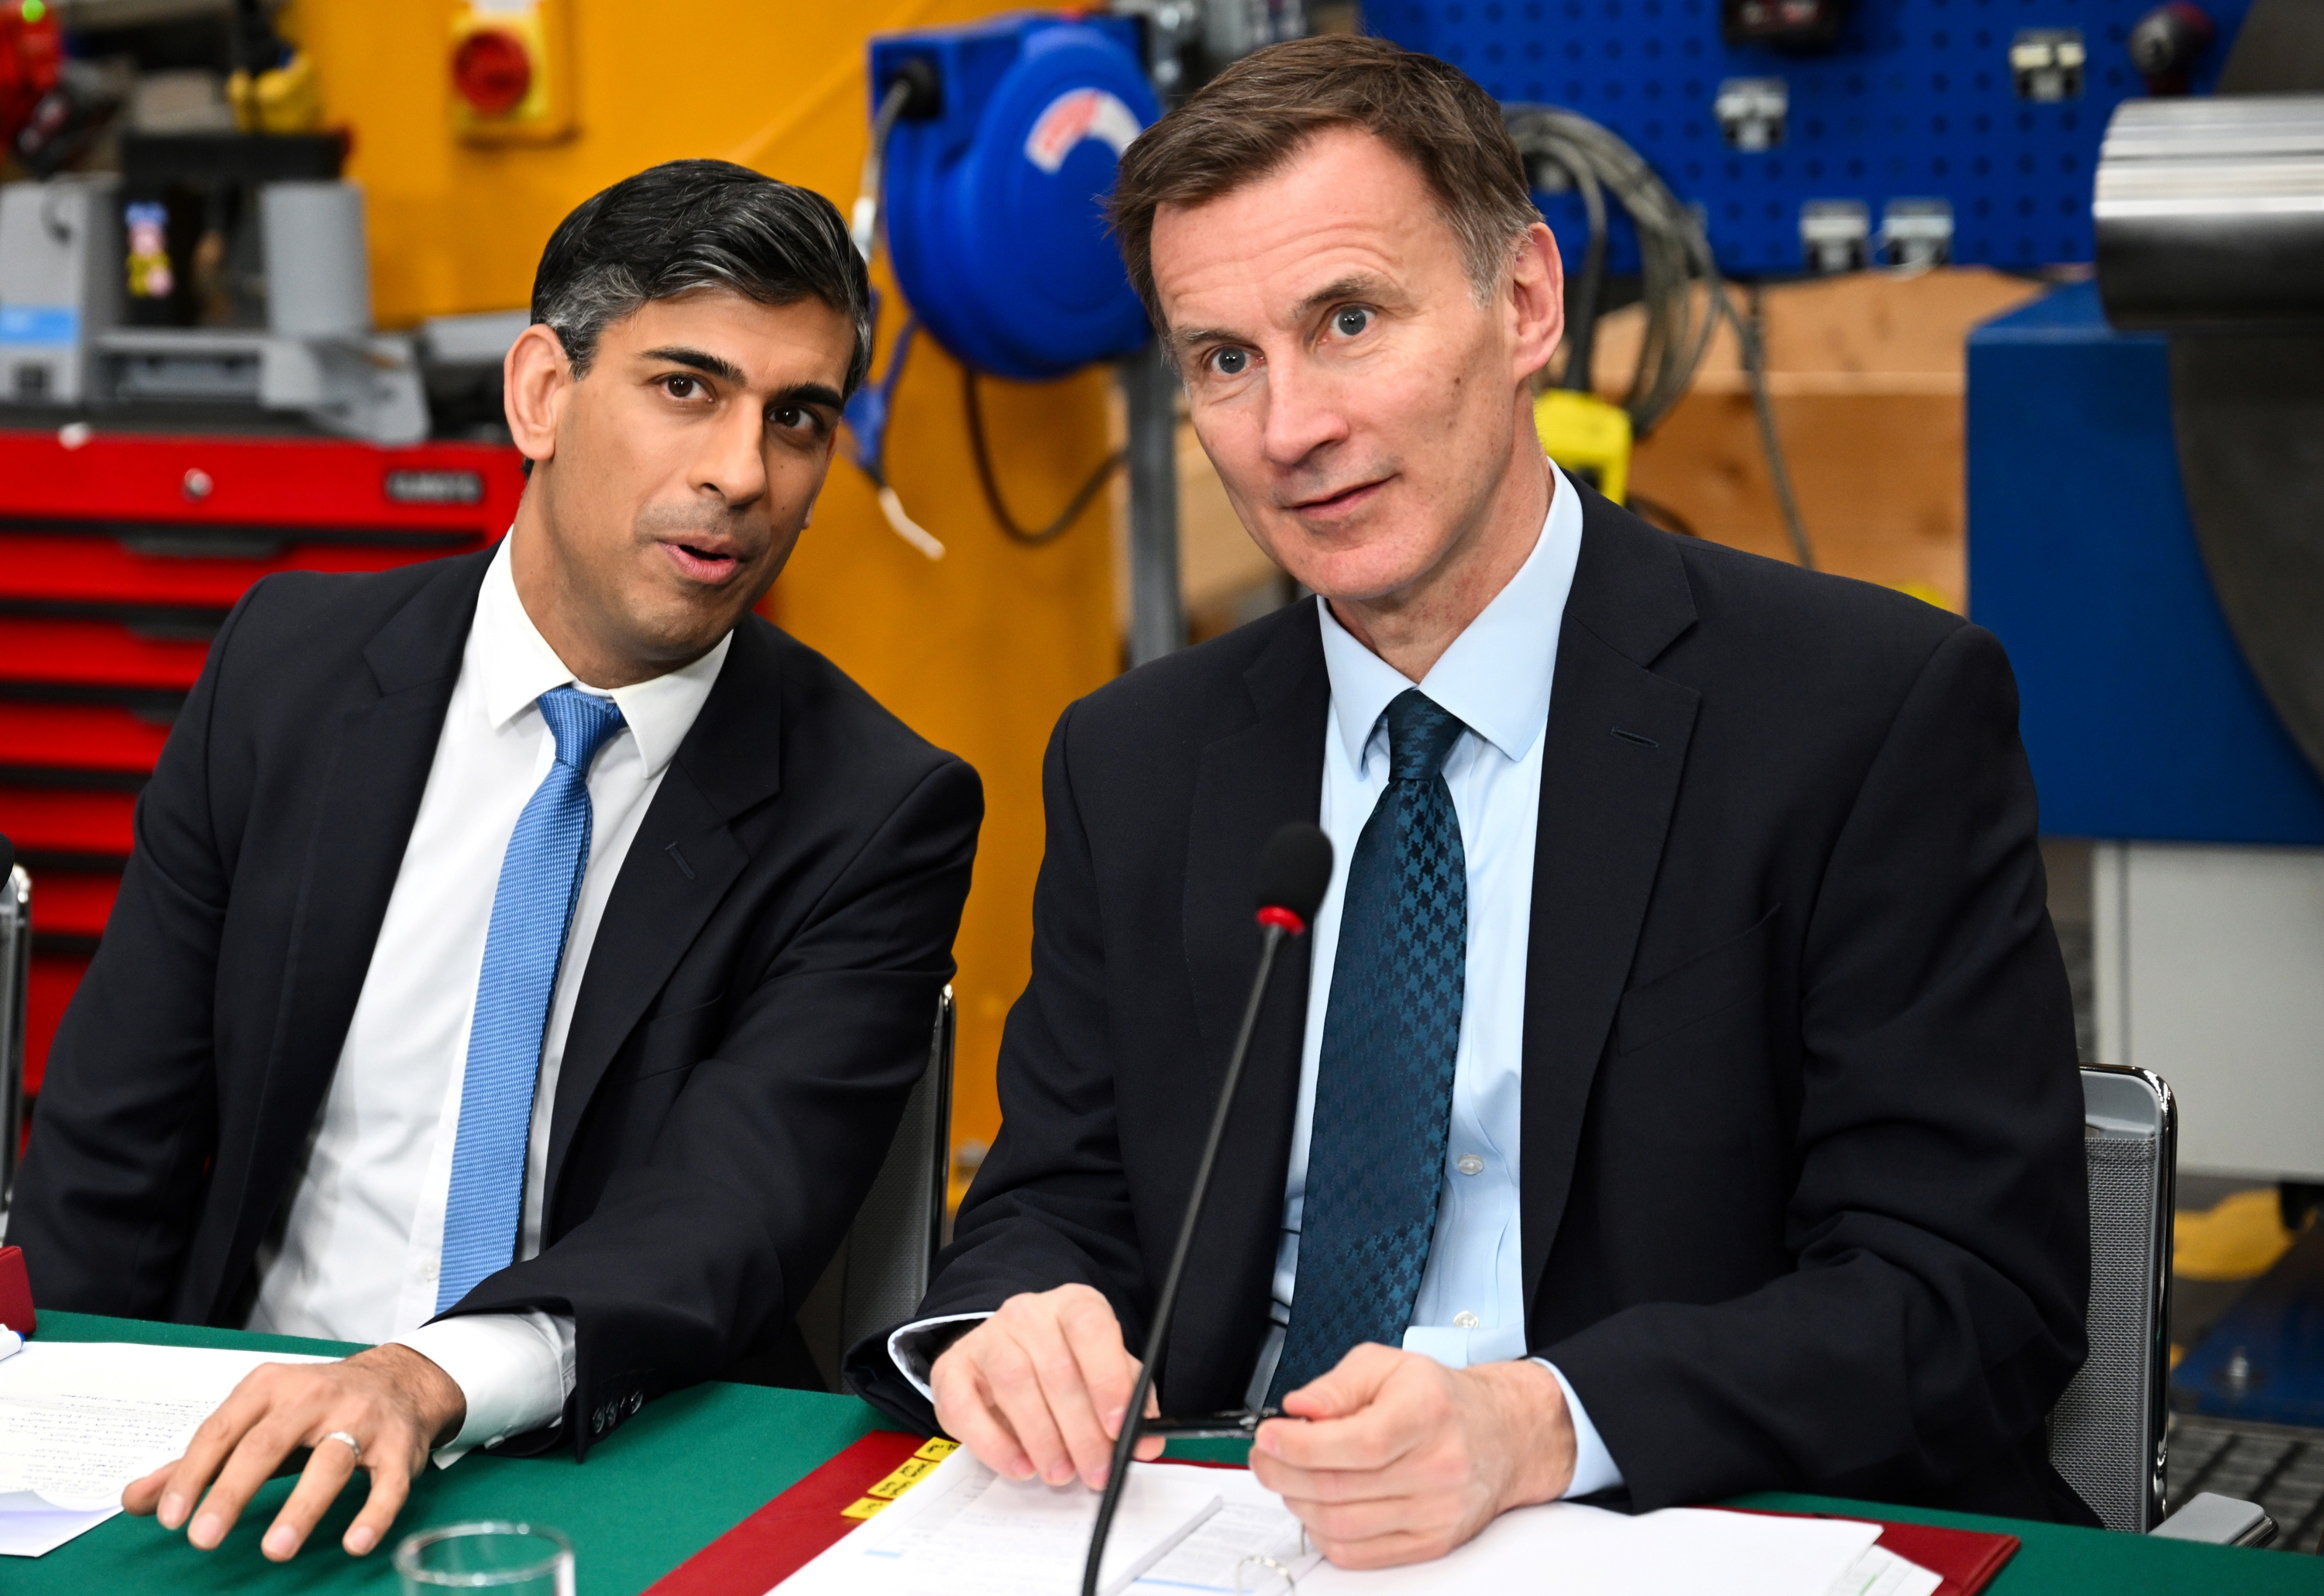 It is understood Rishi Sunak and Jeremy Hunt will meet on Sunday evening to make a final decision on tax cuts.